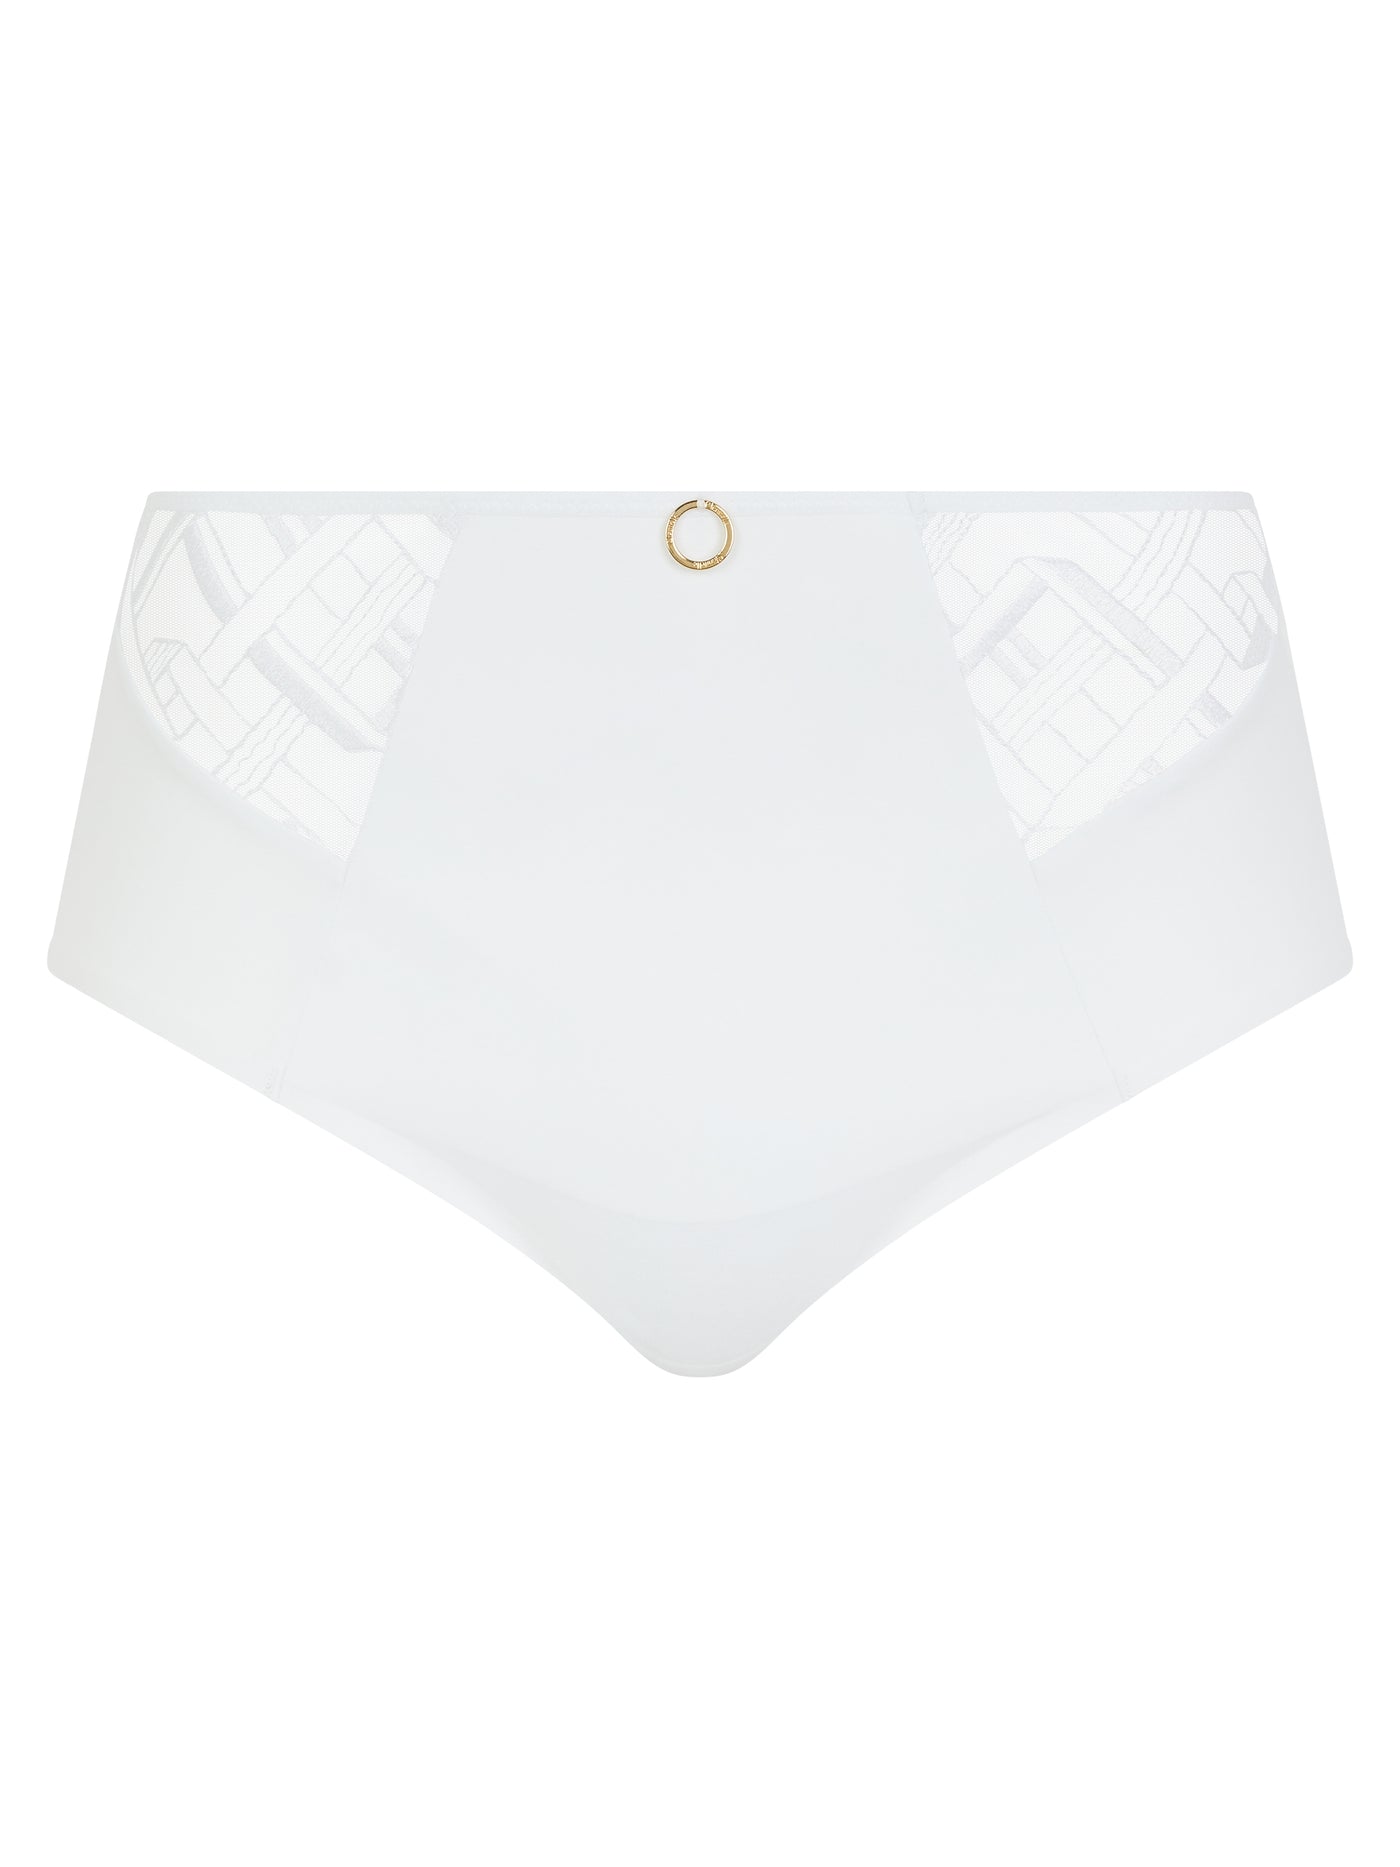 Chantelle Graphic Support High Waisted Full Brief White